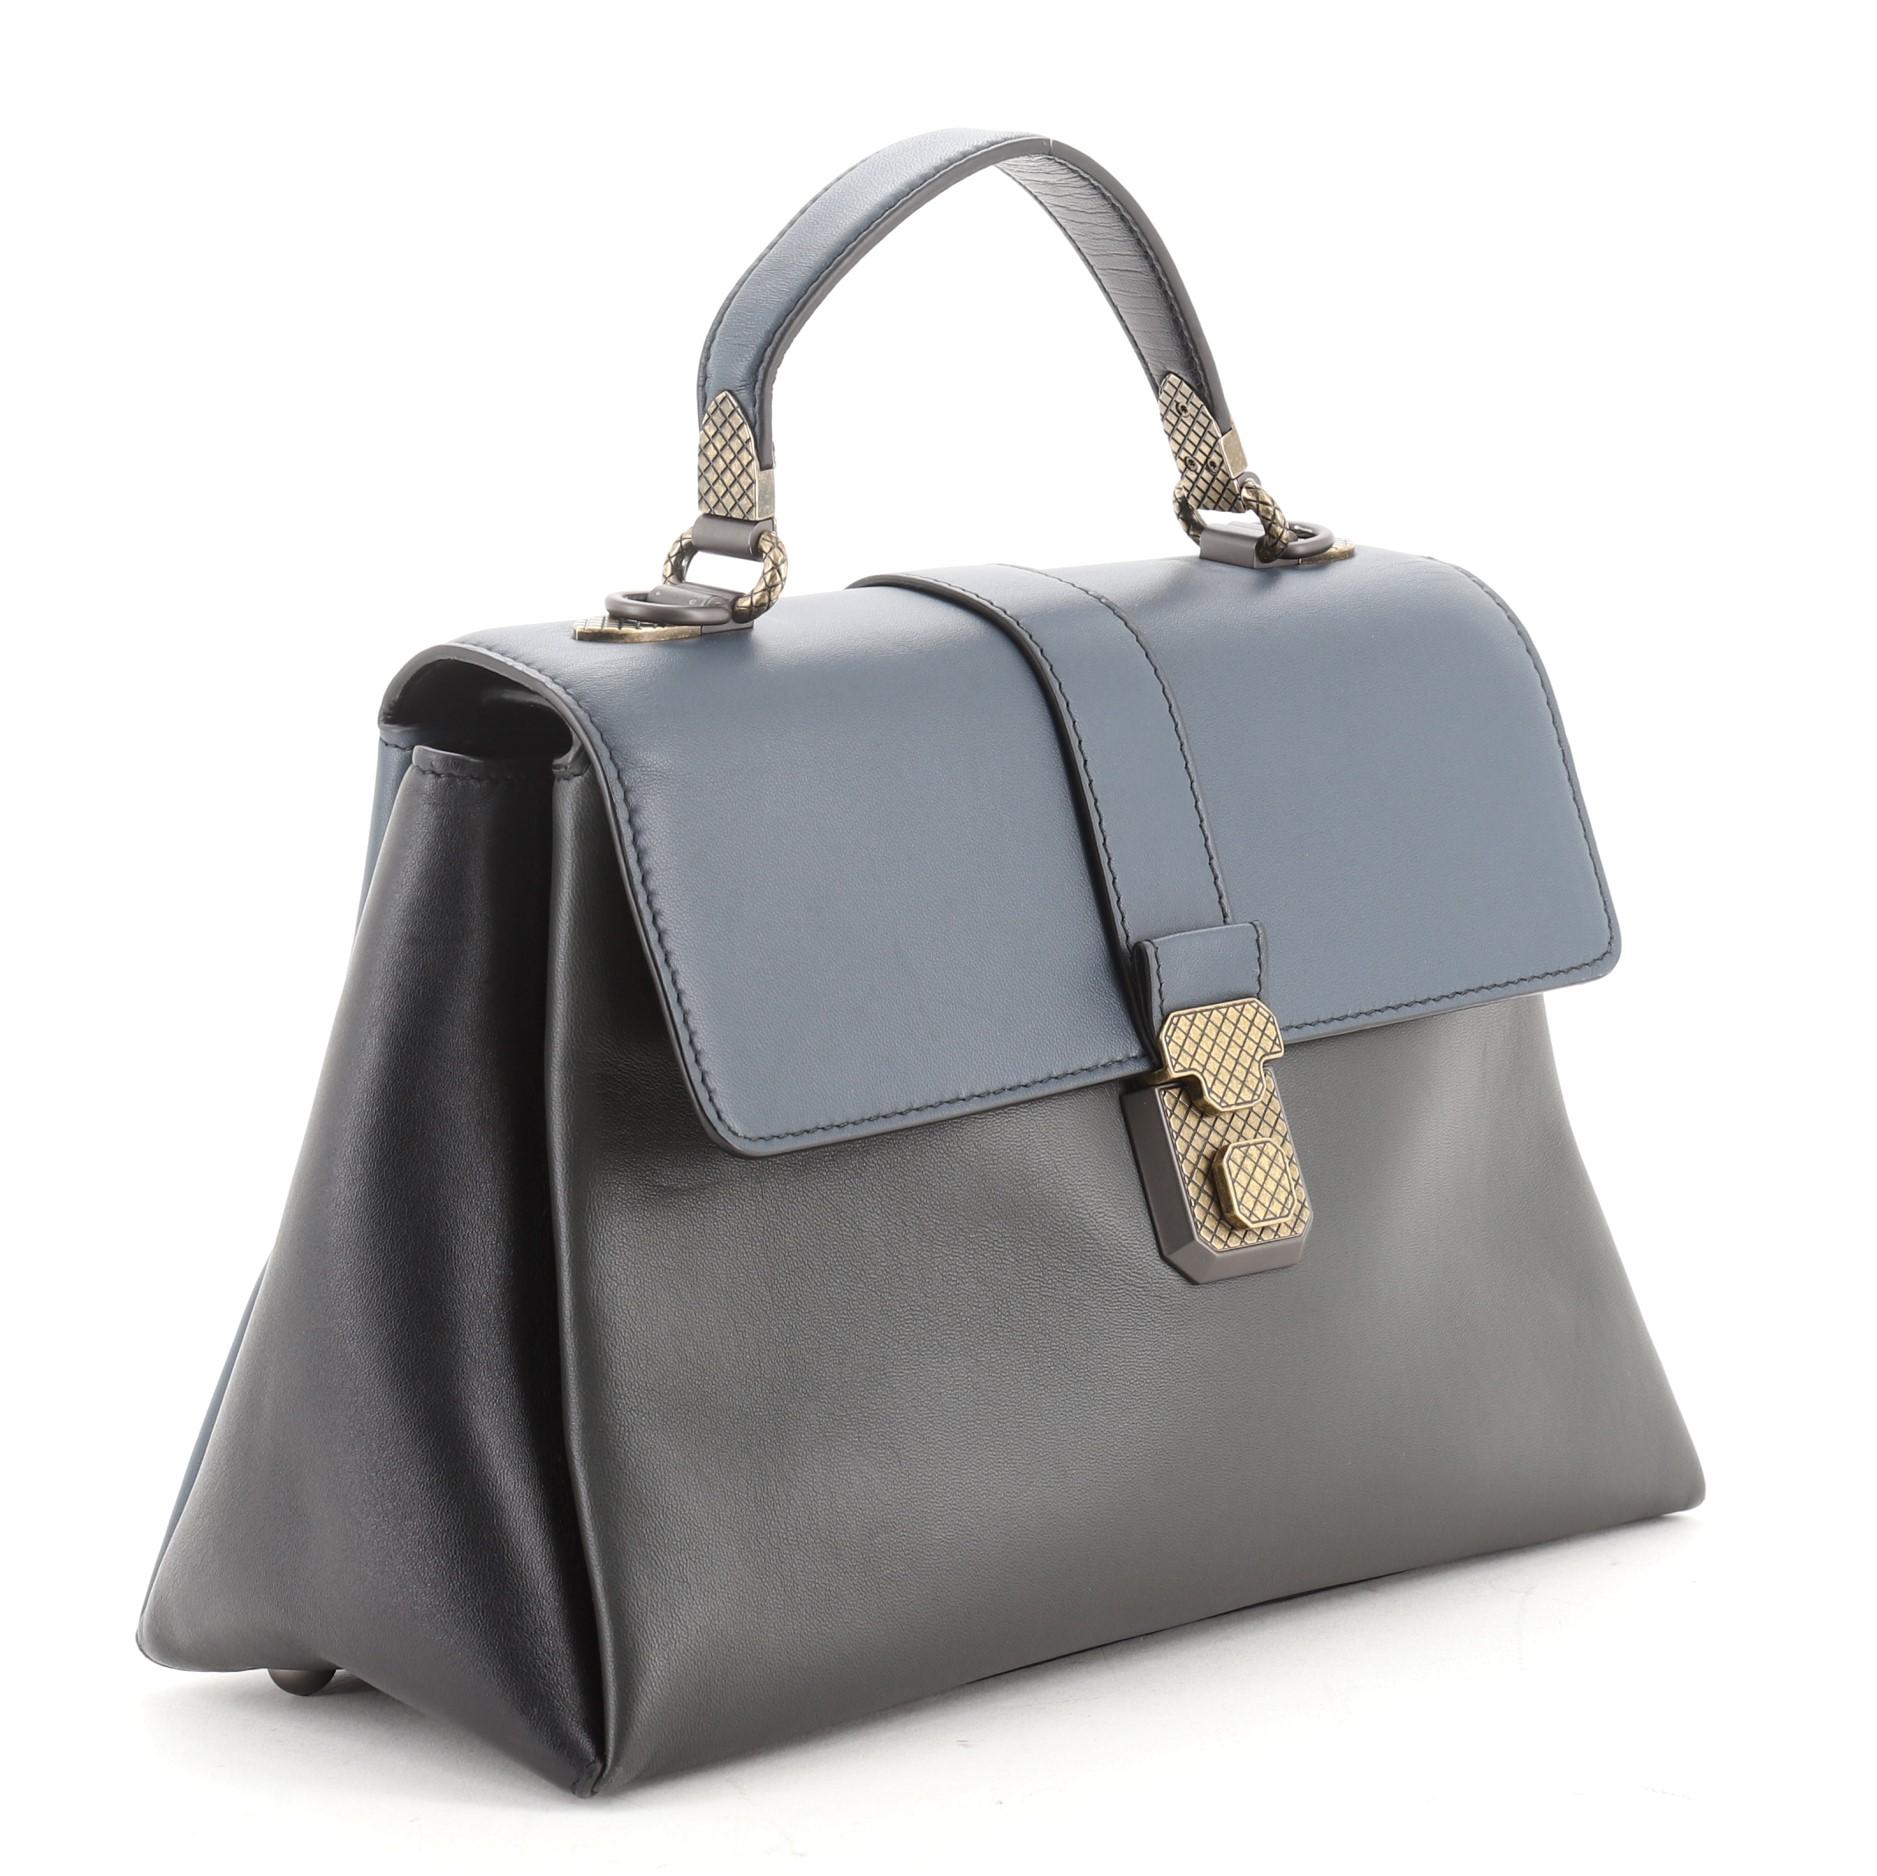 Bottega Veneta Piazza Top Handle Bag Leather with Intrecciato Detail Small
Blue, Gray

Condition Details: Wear on base corner, creasing and scuffs on exterior and underneath flap. loss of shape on handle, minor wear in interior, scratches on